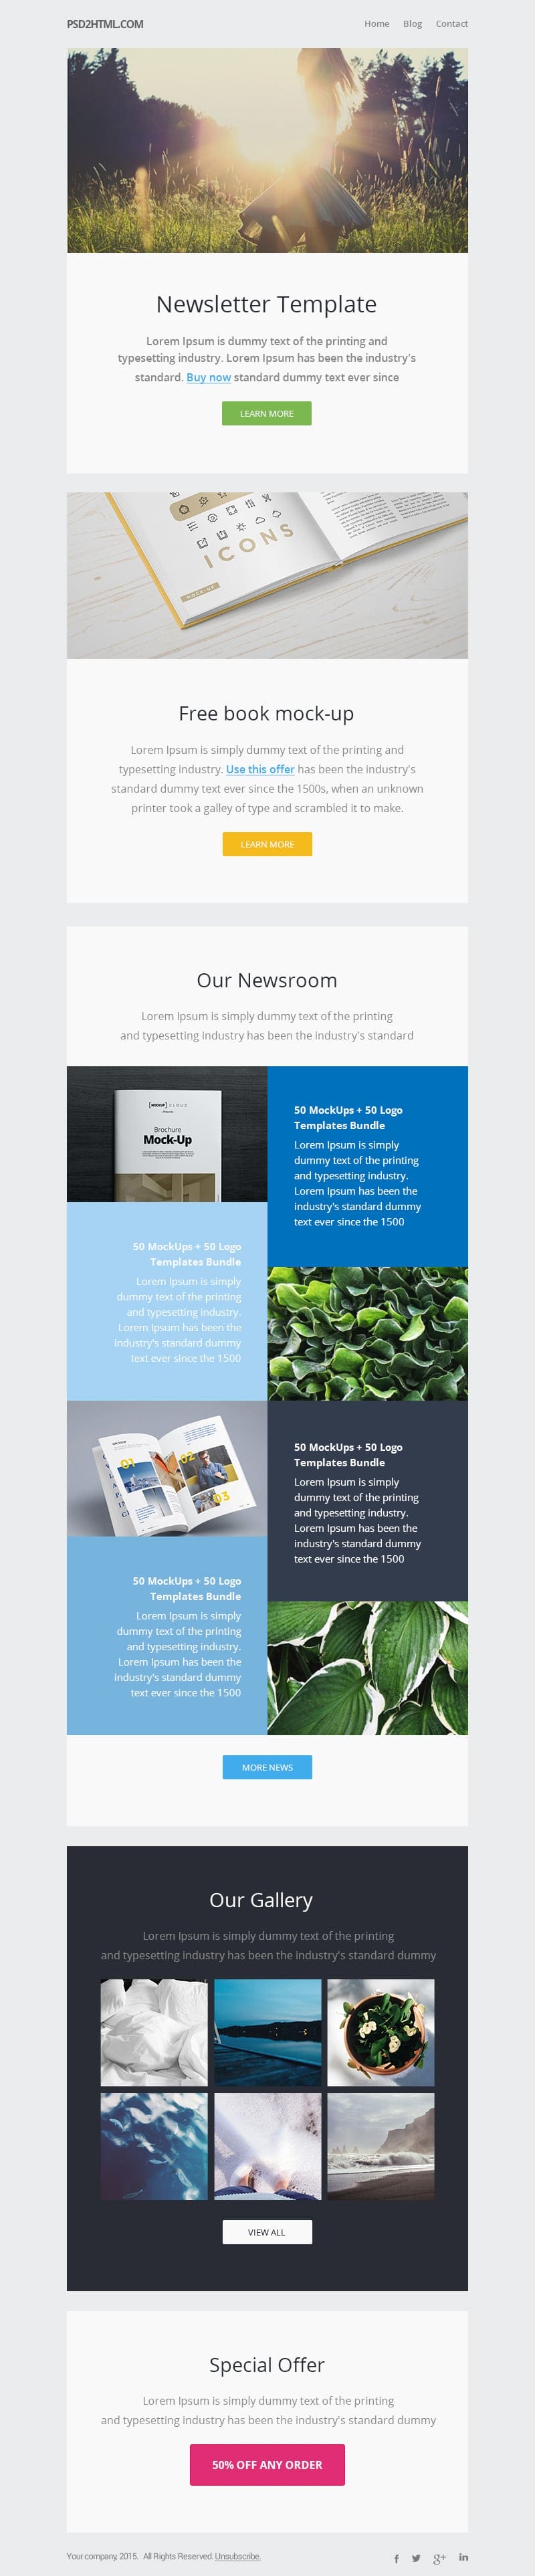 Free Newsletter Template 